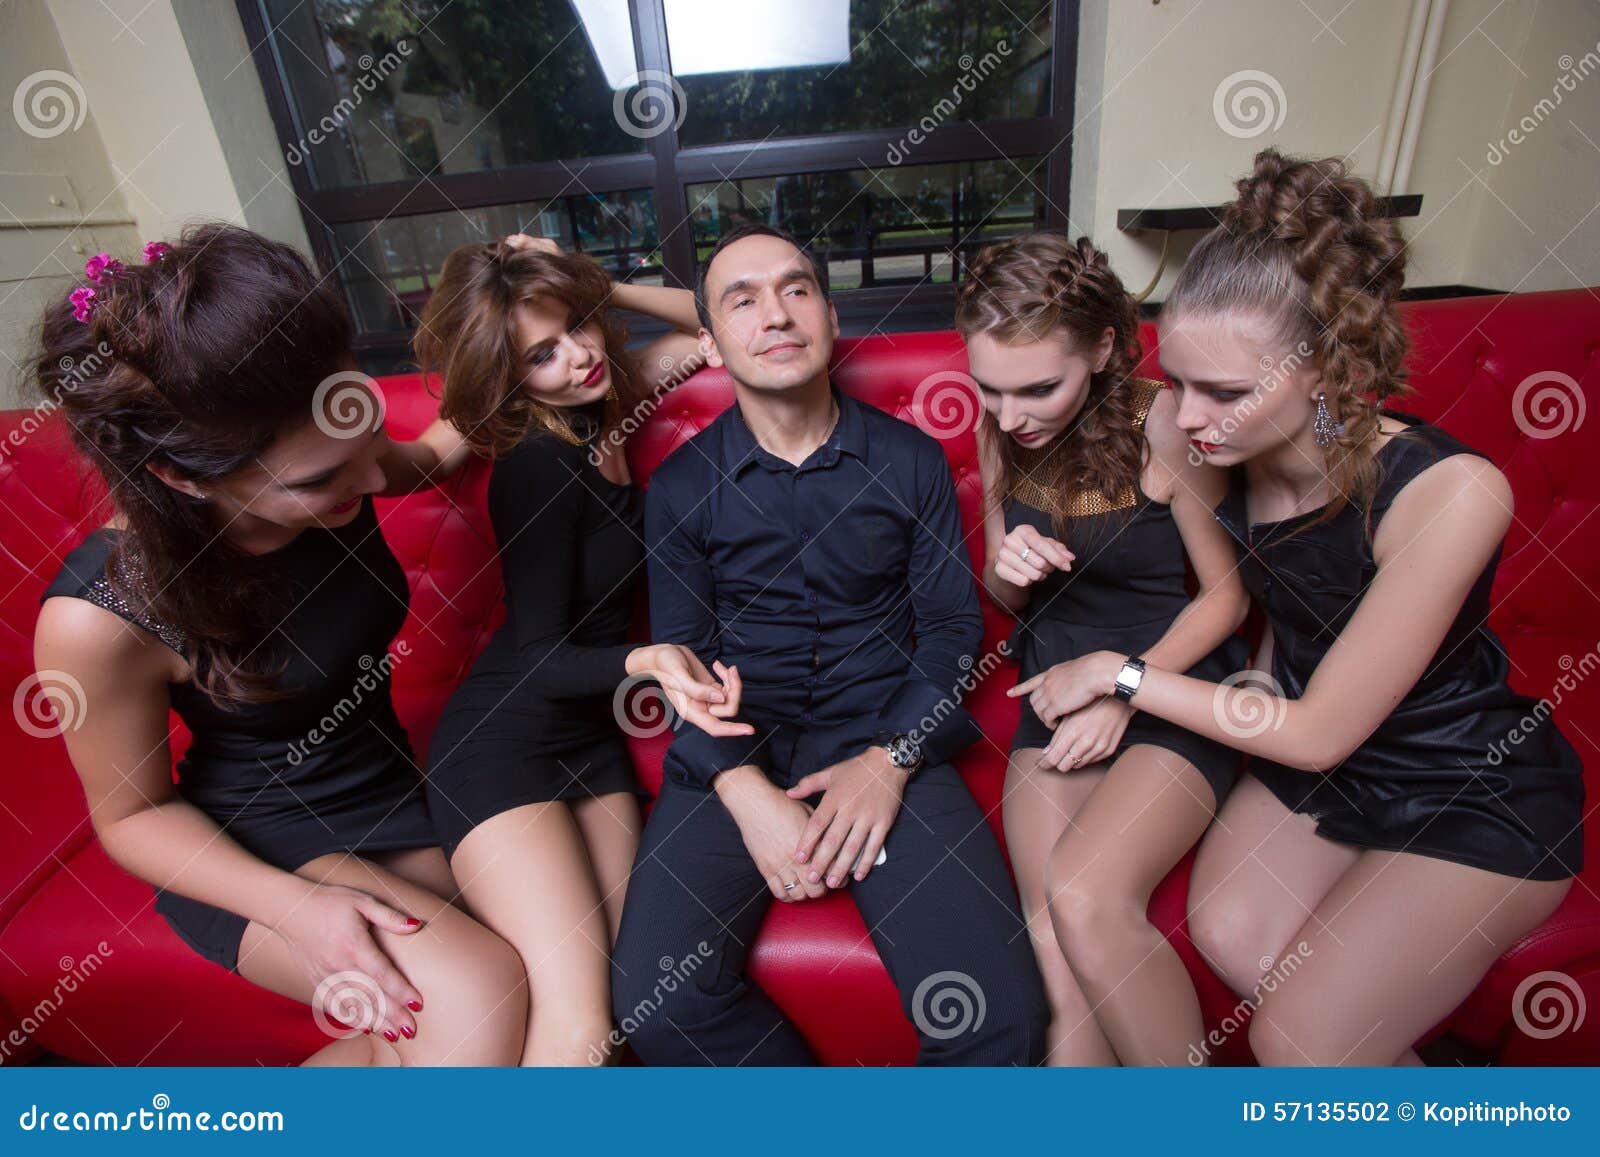 lovelace man surrounded by hot women wanting